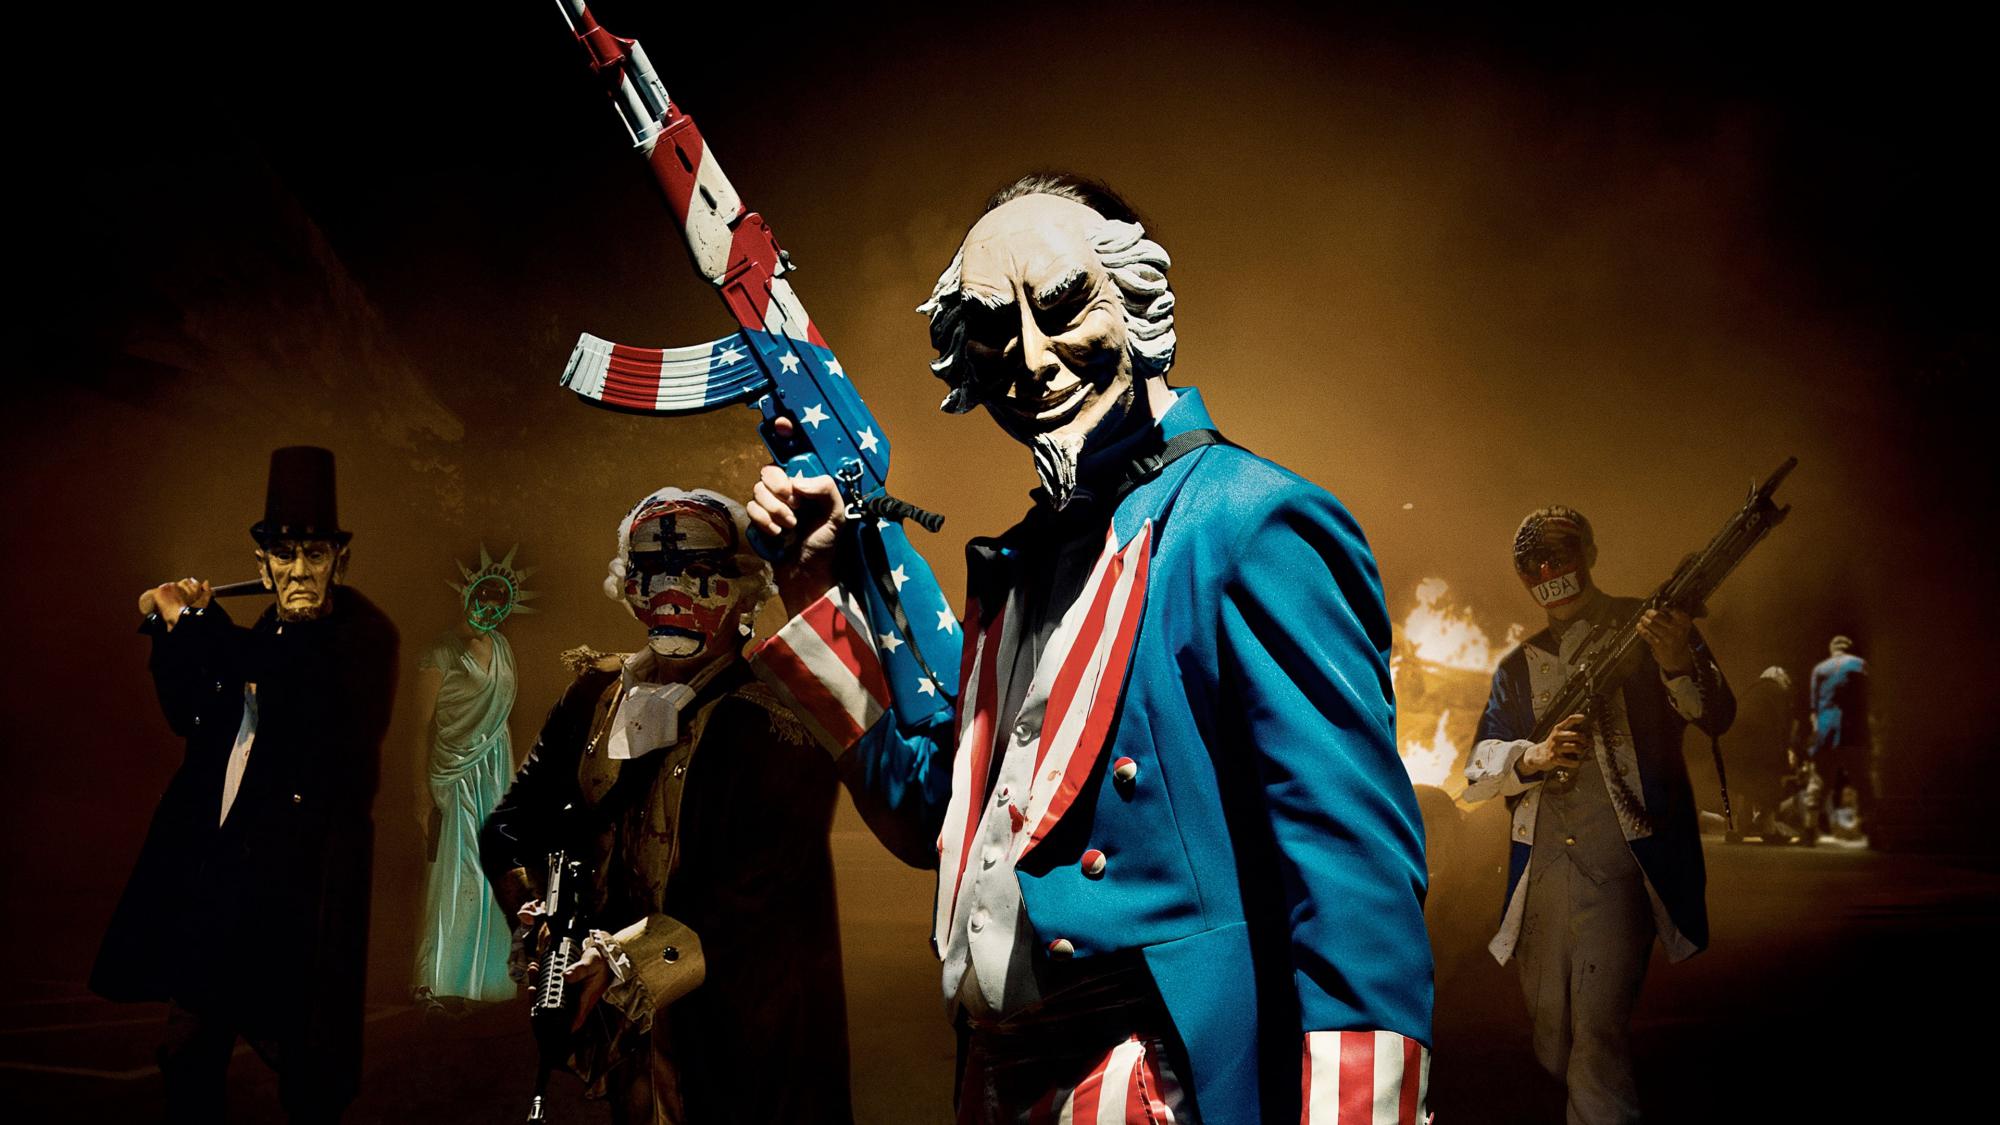 Backdrop Image for The Purge: Election Year